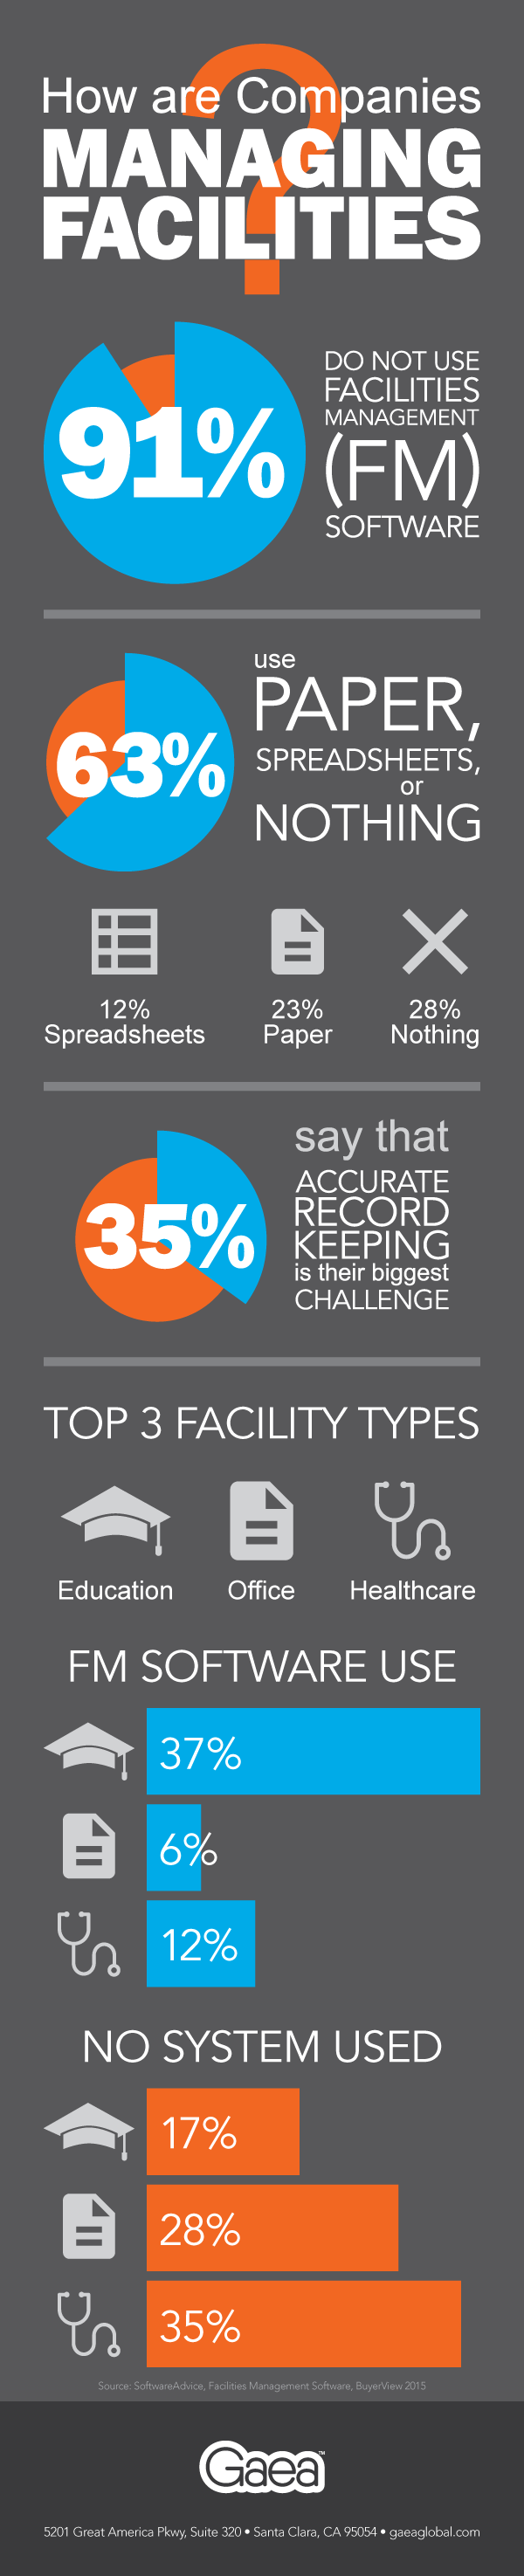 Gaea Infographic: How are Companies Managing Facilities?